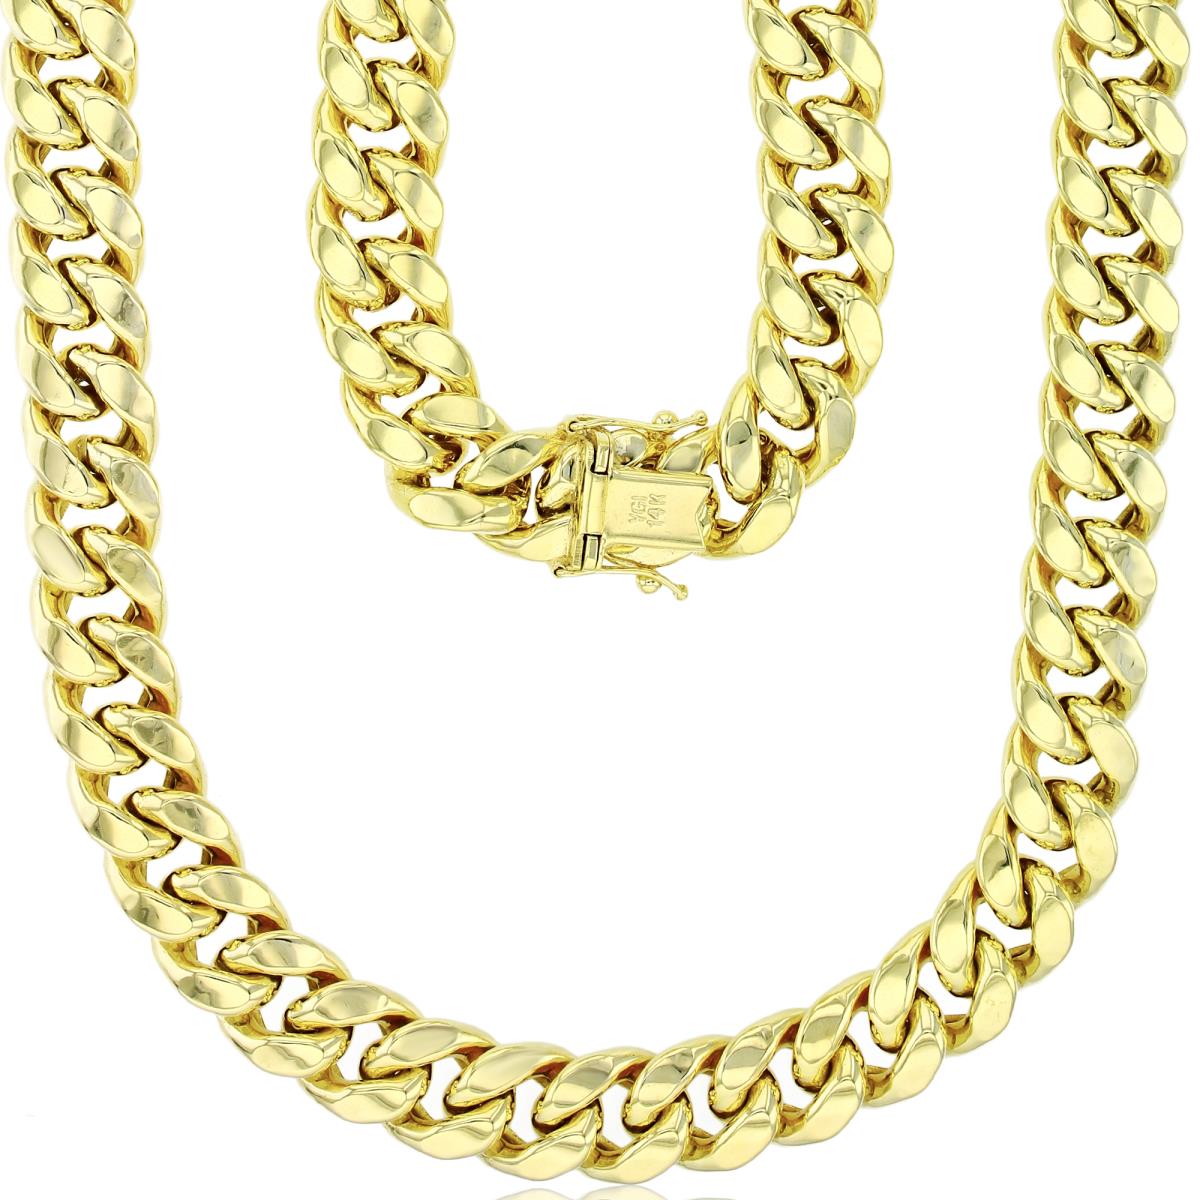 10K Yellow Gold 12mm 30" 300 Hollow Miami Cuban Chain with Box Lock